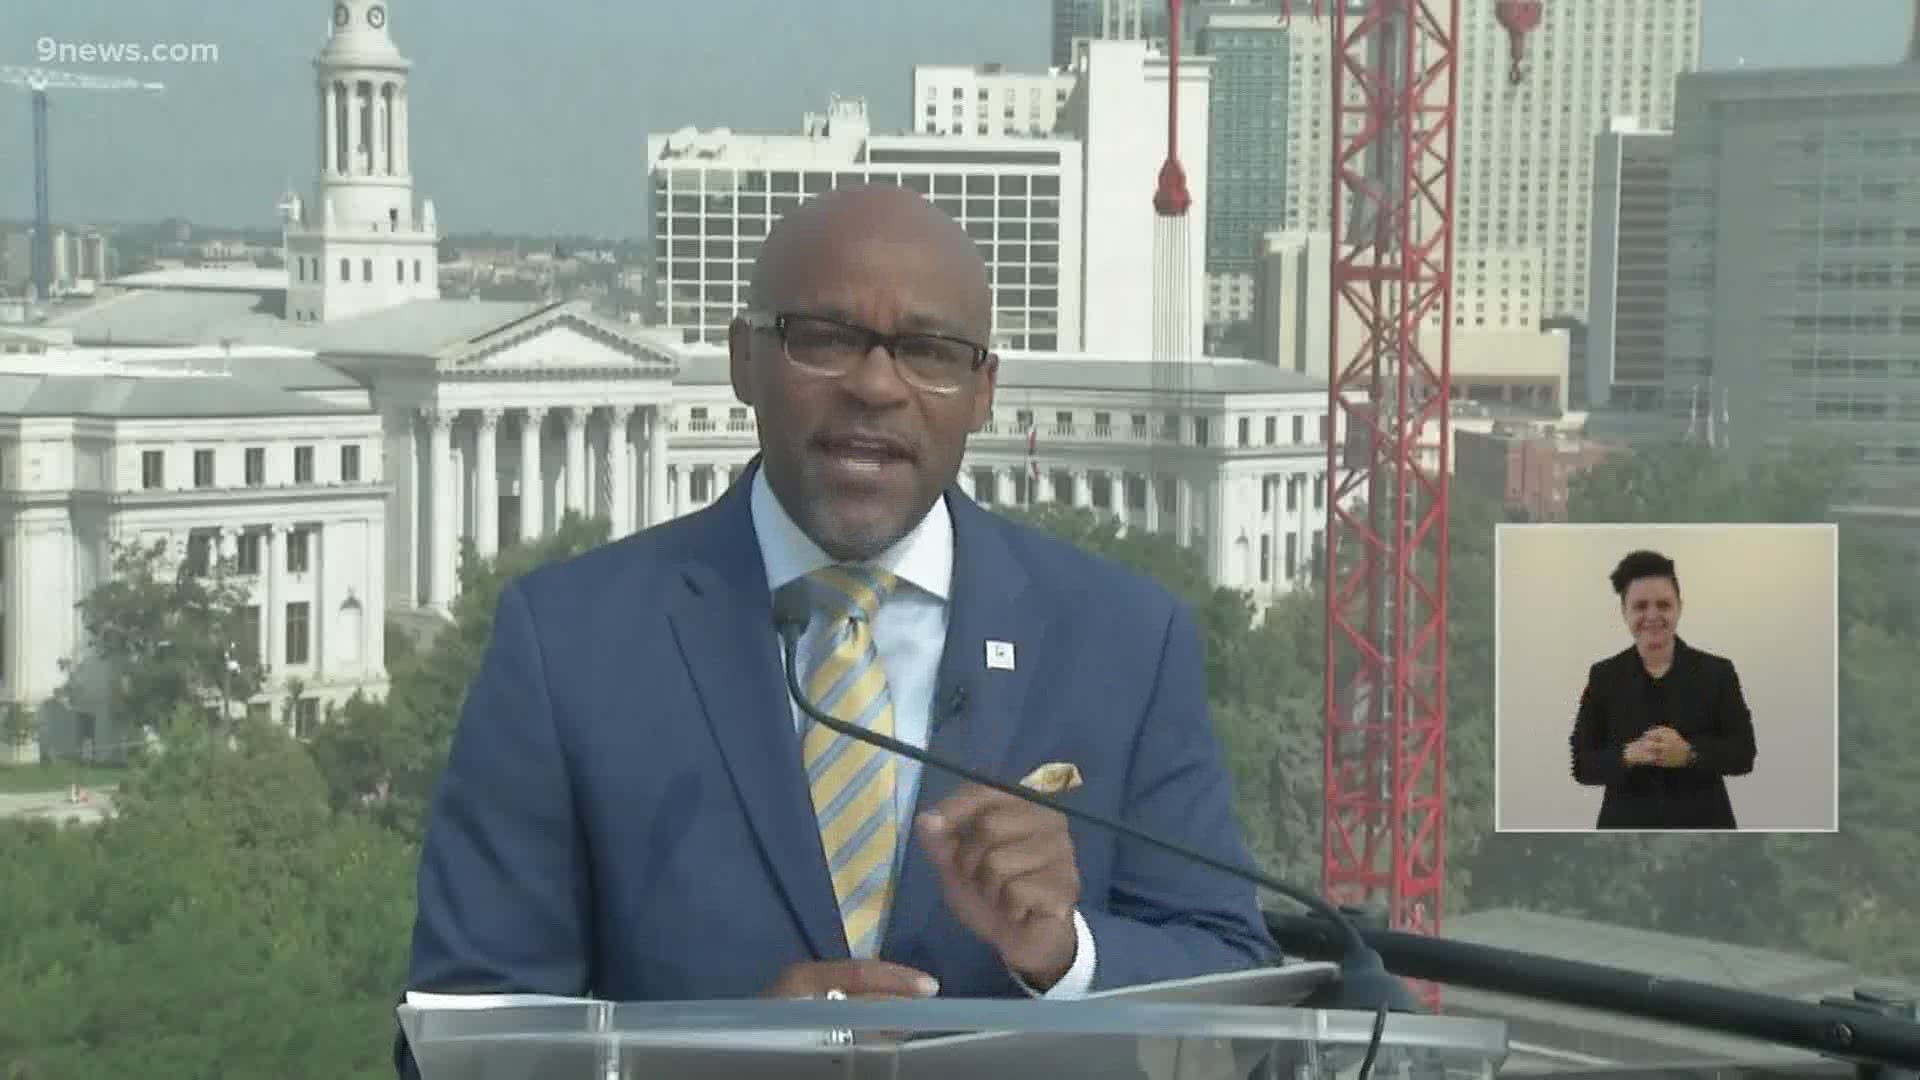 Denver's mayor spoke about continuing the fight against the COVID-19 pandemic, public safety and housing and homelessness recovery during the address Monday morning.